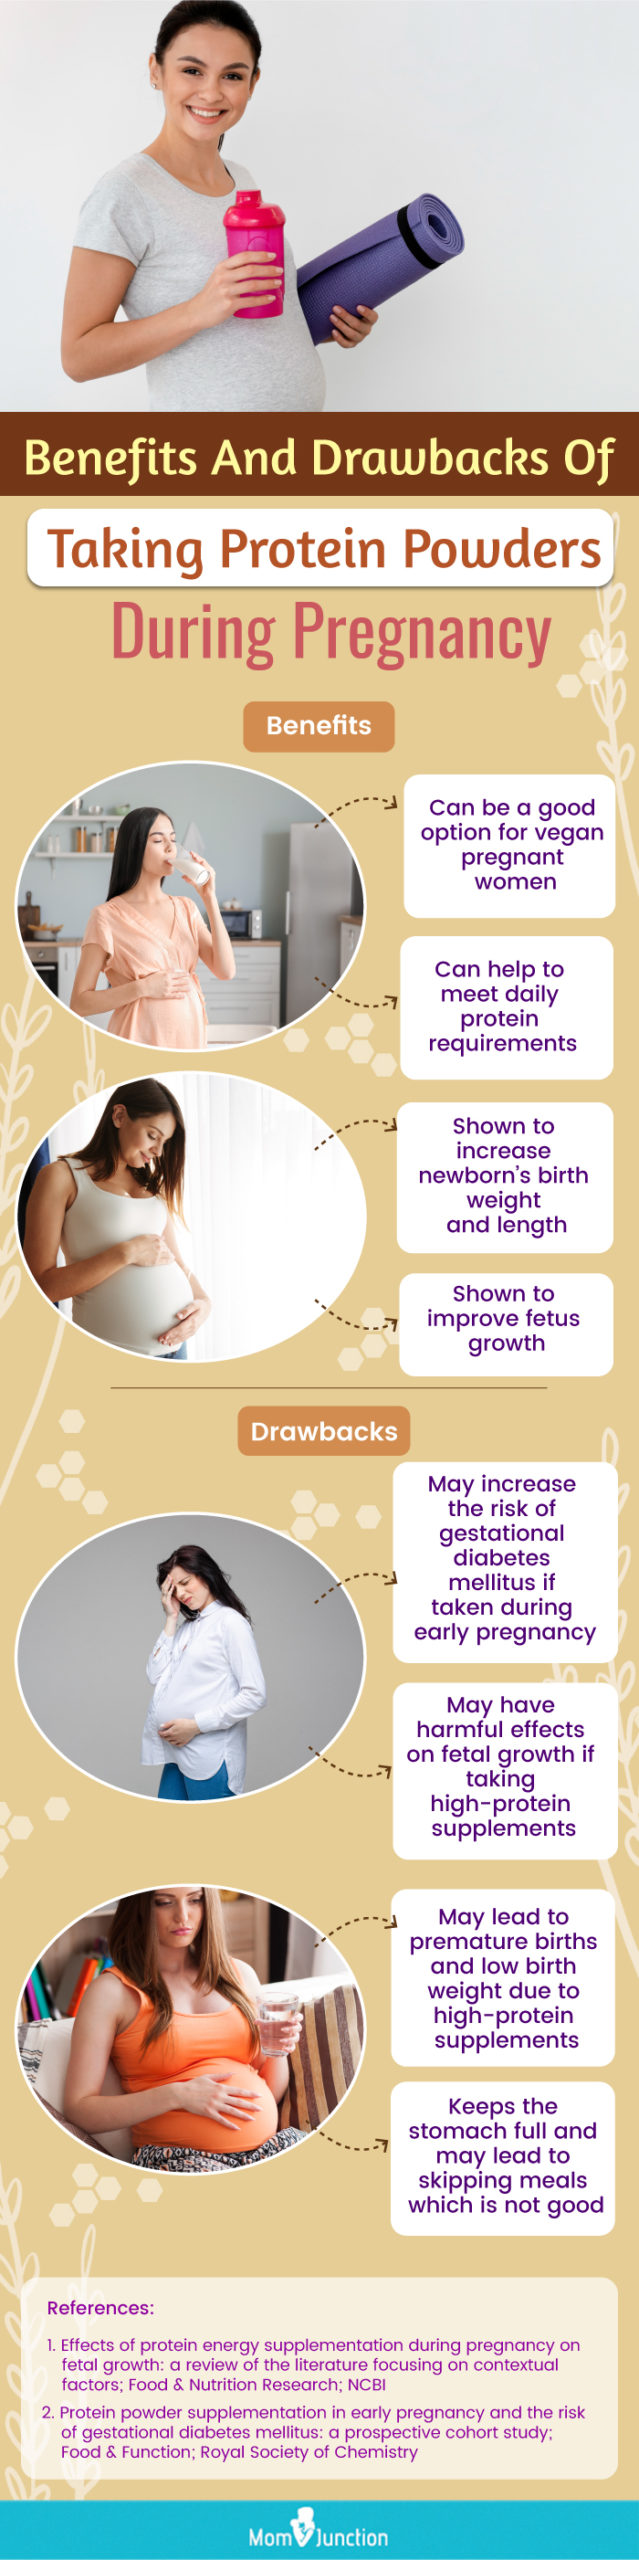 Benefits And Drawbacks Of Taking Protein Powders During Pregnancy (infographic)